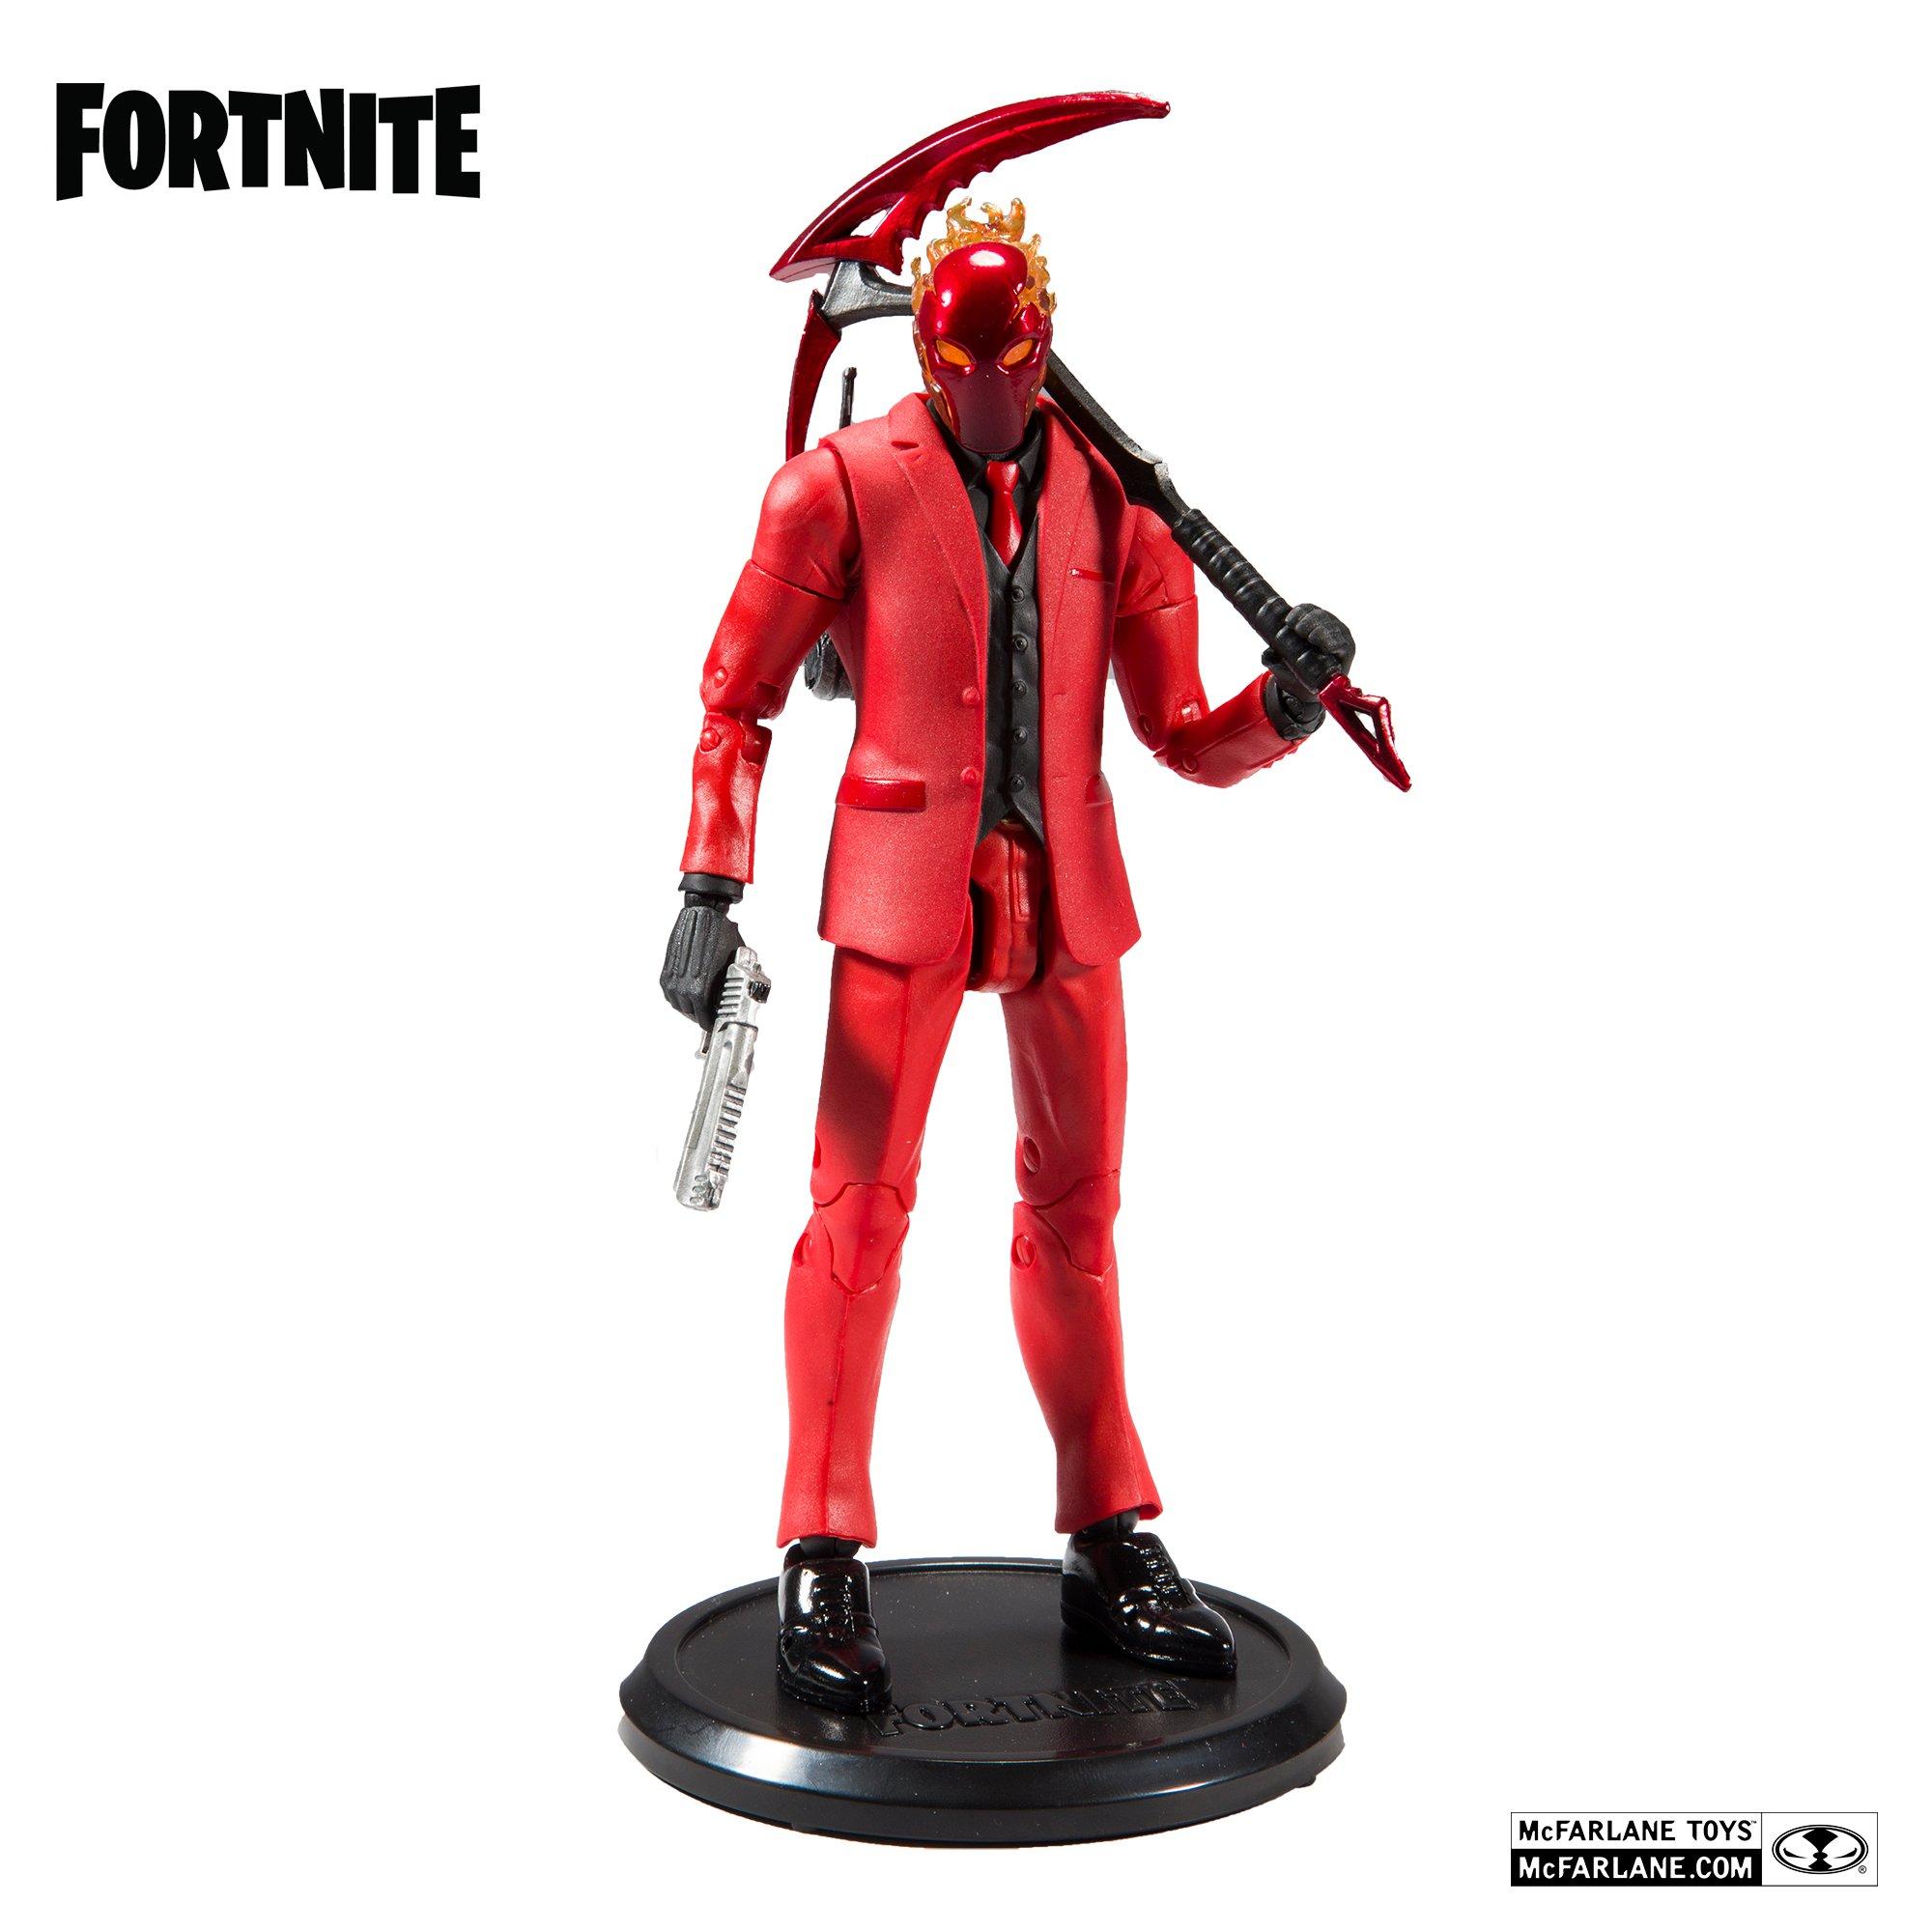 How Much Does Fortnite Toys Cost In Gamestop Fortnite Inferno Action Figure Gamestop